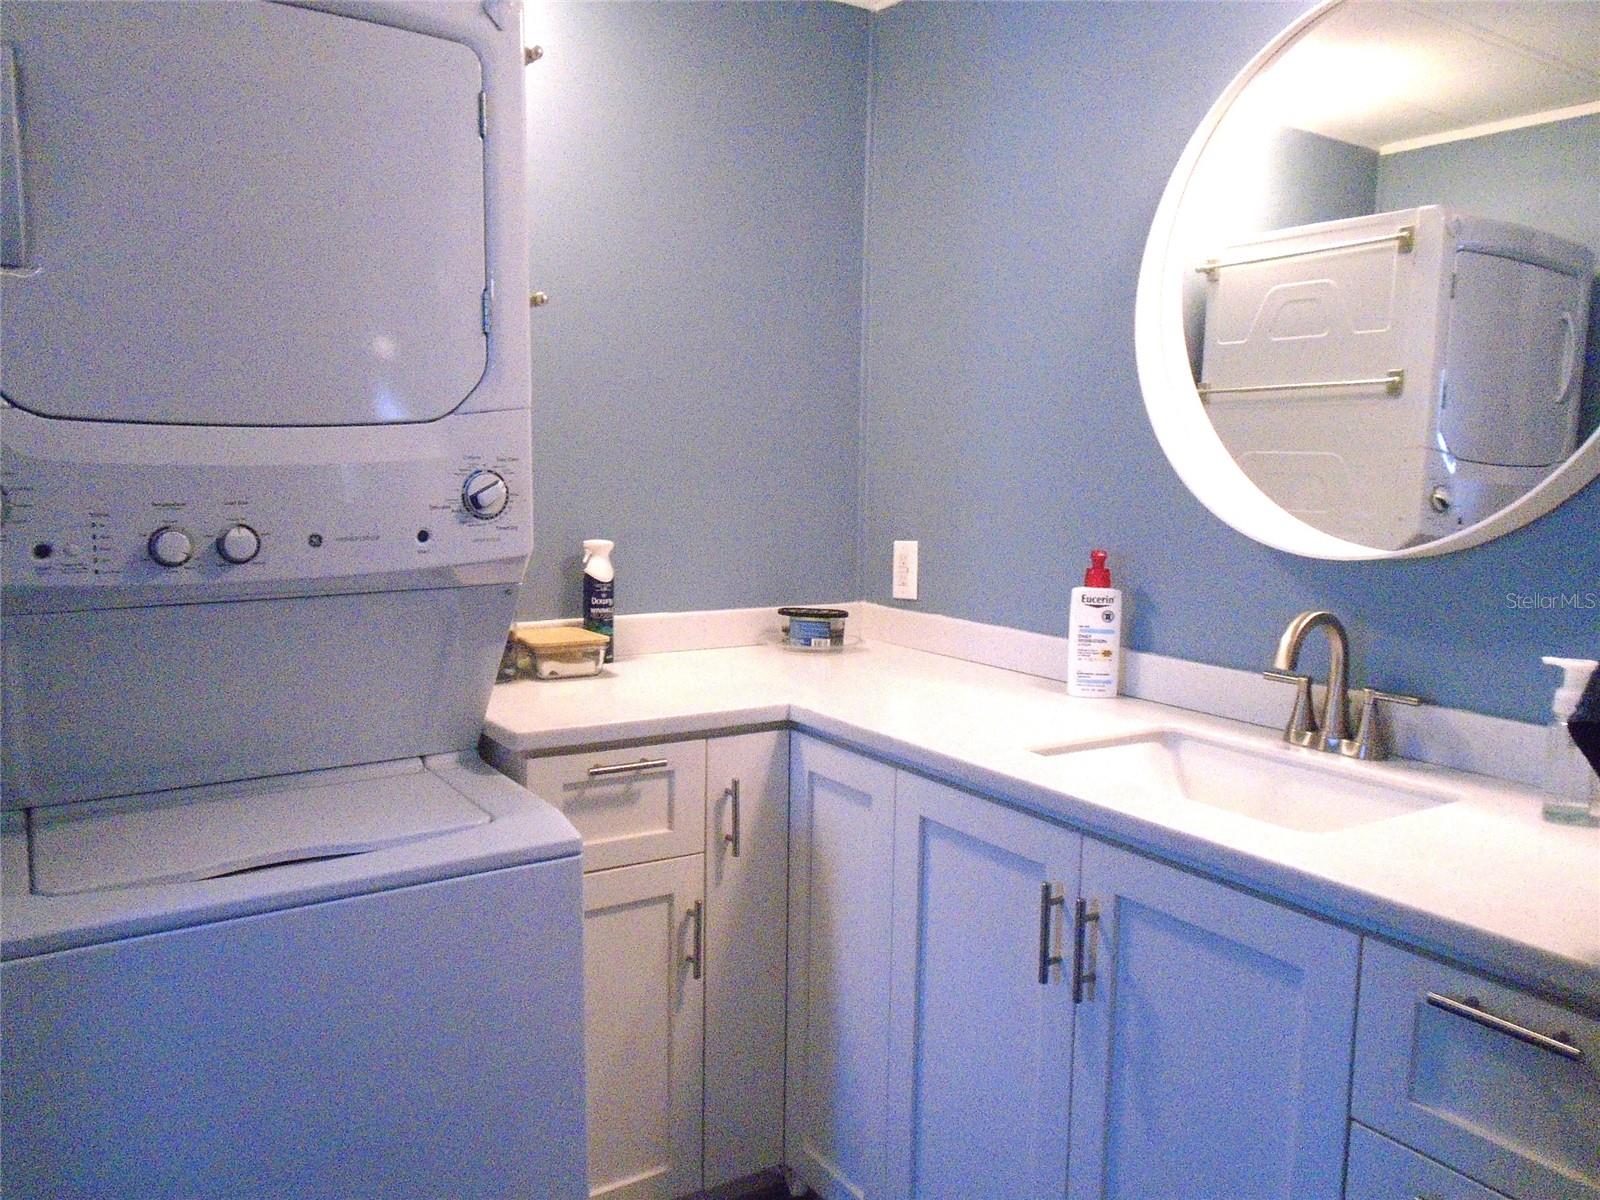 Ensuite Bathroom has Stackable Washer and Dryer * Upgraded Quartz Counter Tops and Nearly New Cabinets